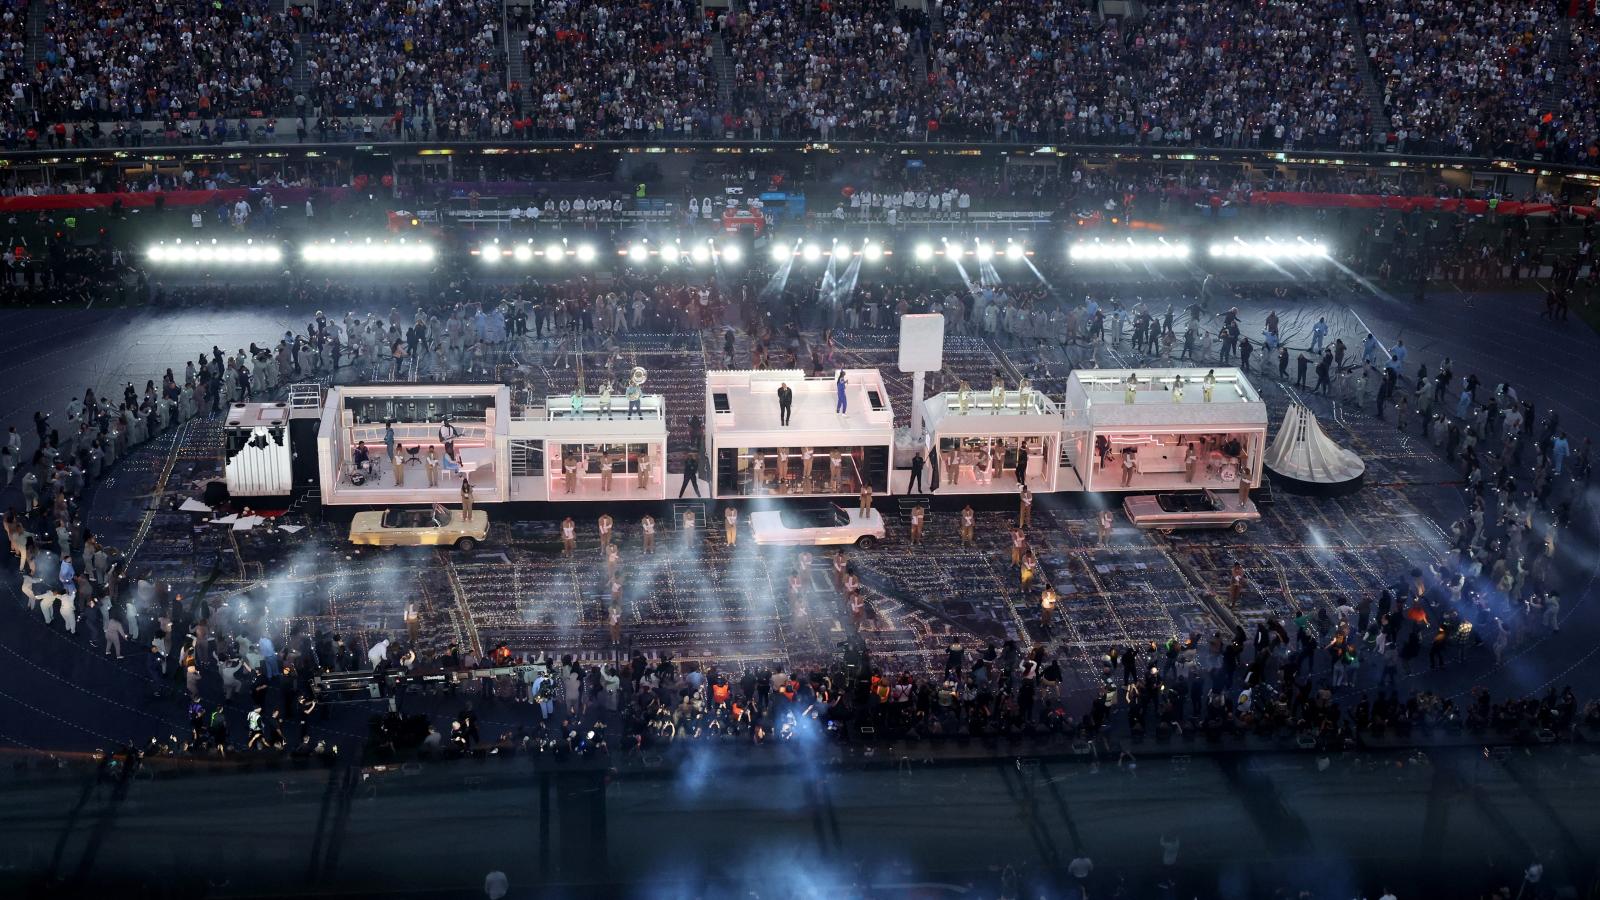 Spectacle or Sham? The Hypocrisy of the NFL's Superbowl Halftime Show –  Ampersand